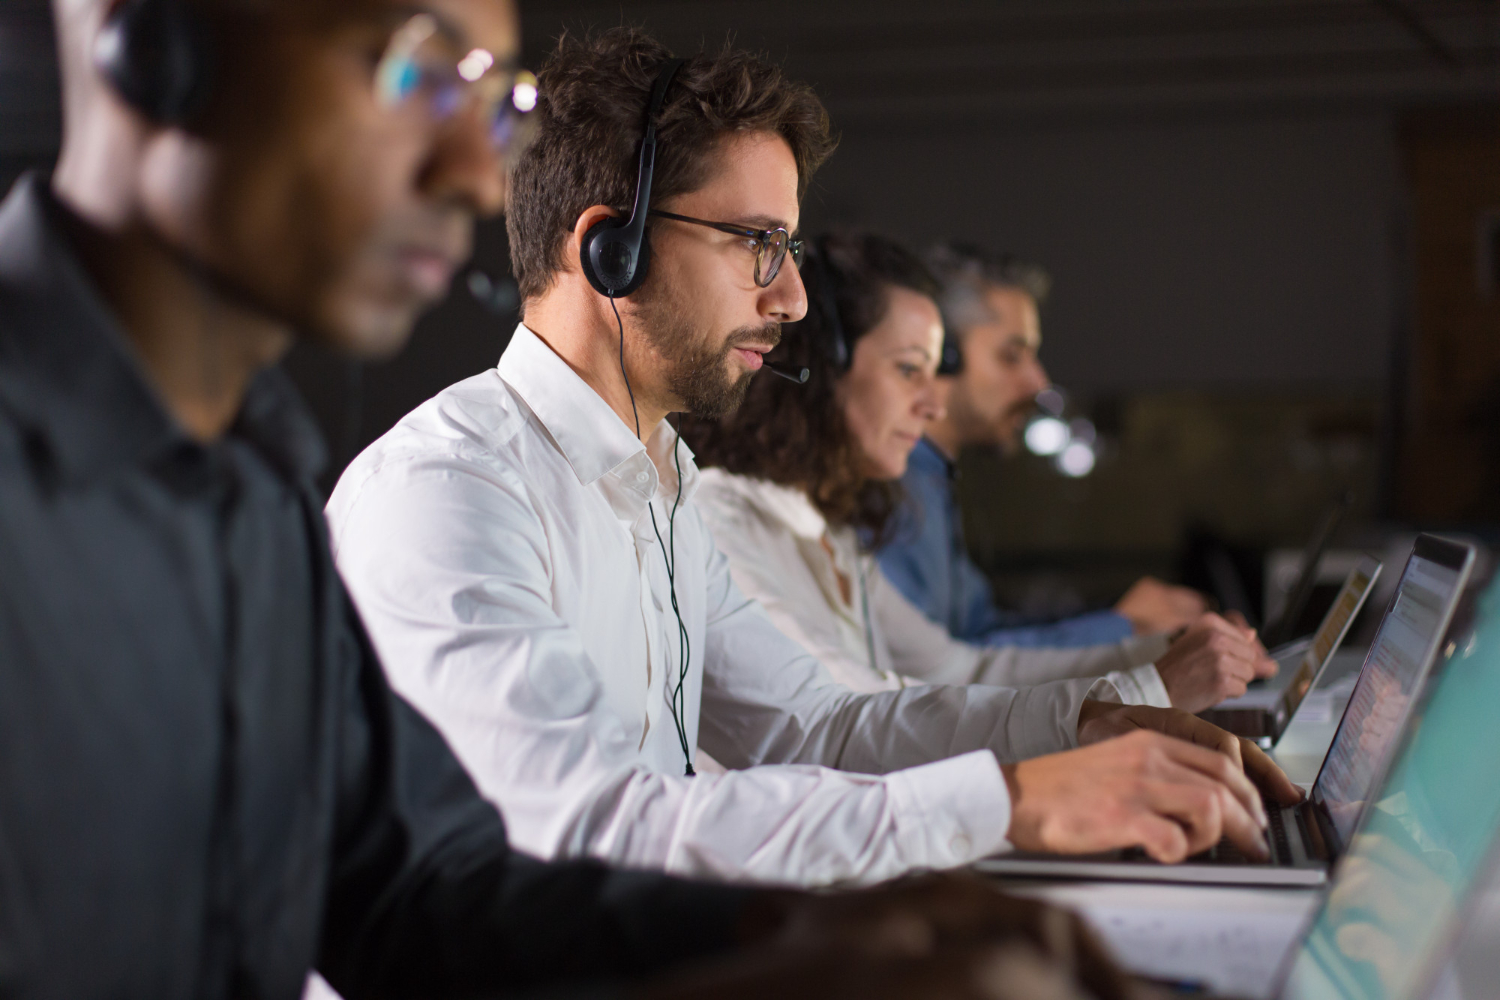 Innovations in Call Center Technology